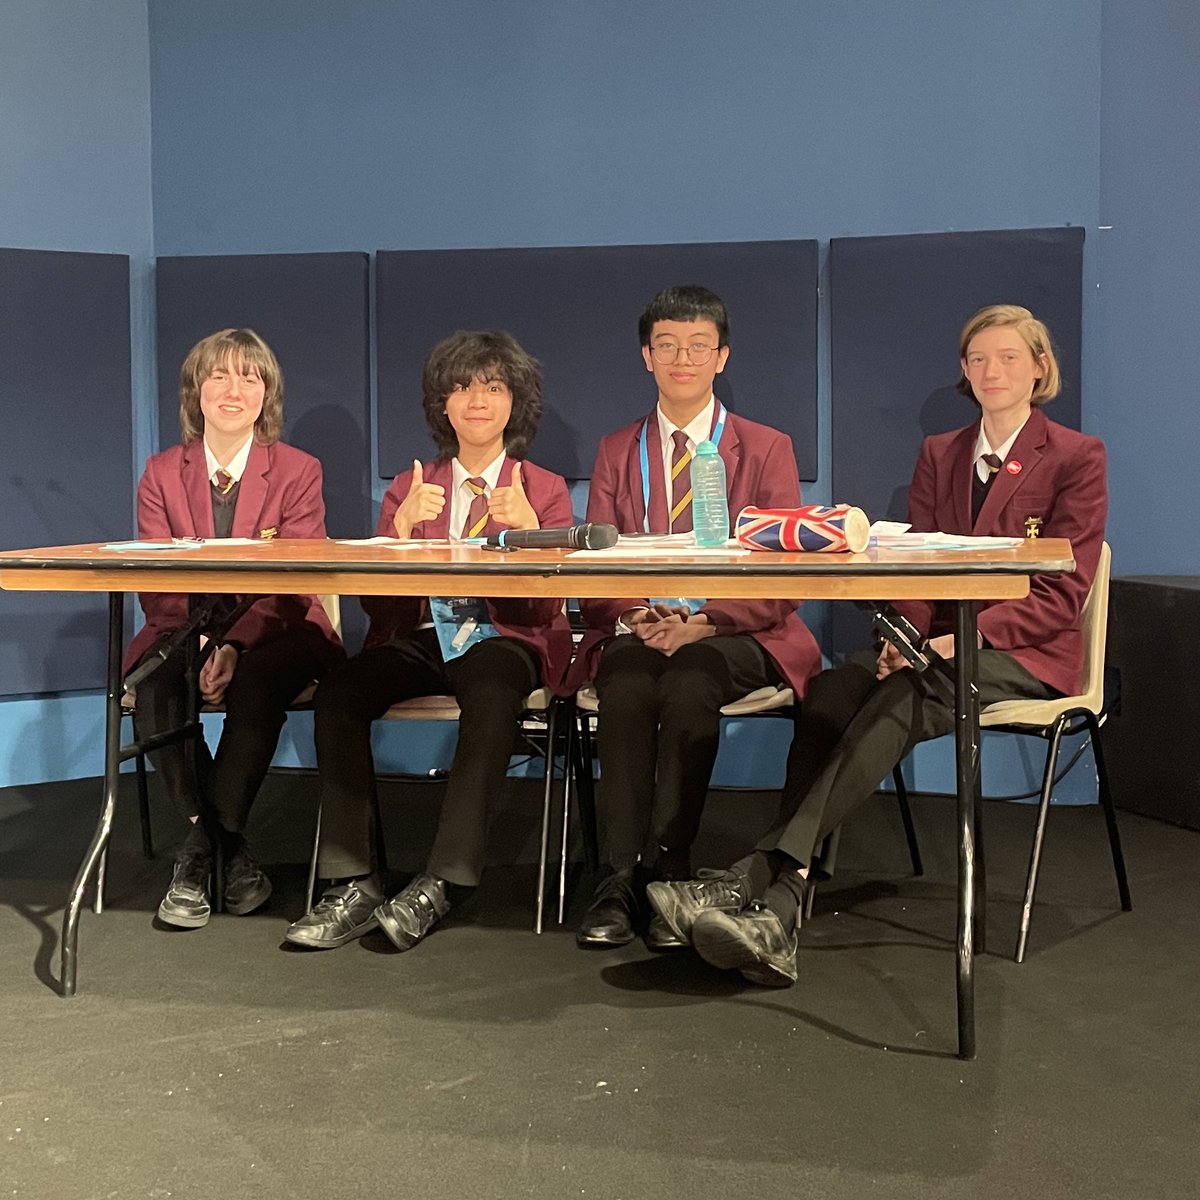 The debate team got to the finals!  Well done to our Debate Team who came runners up in the #Seren Regional Debate. They gave some very convincing arguments and spoke with confidence and persuasion. We are super proud of their success. Well done all 👏